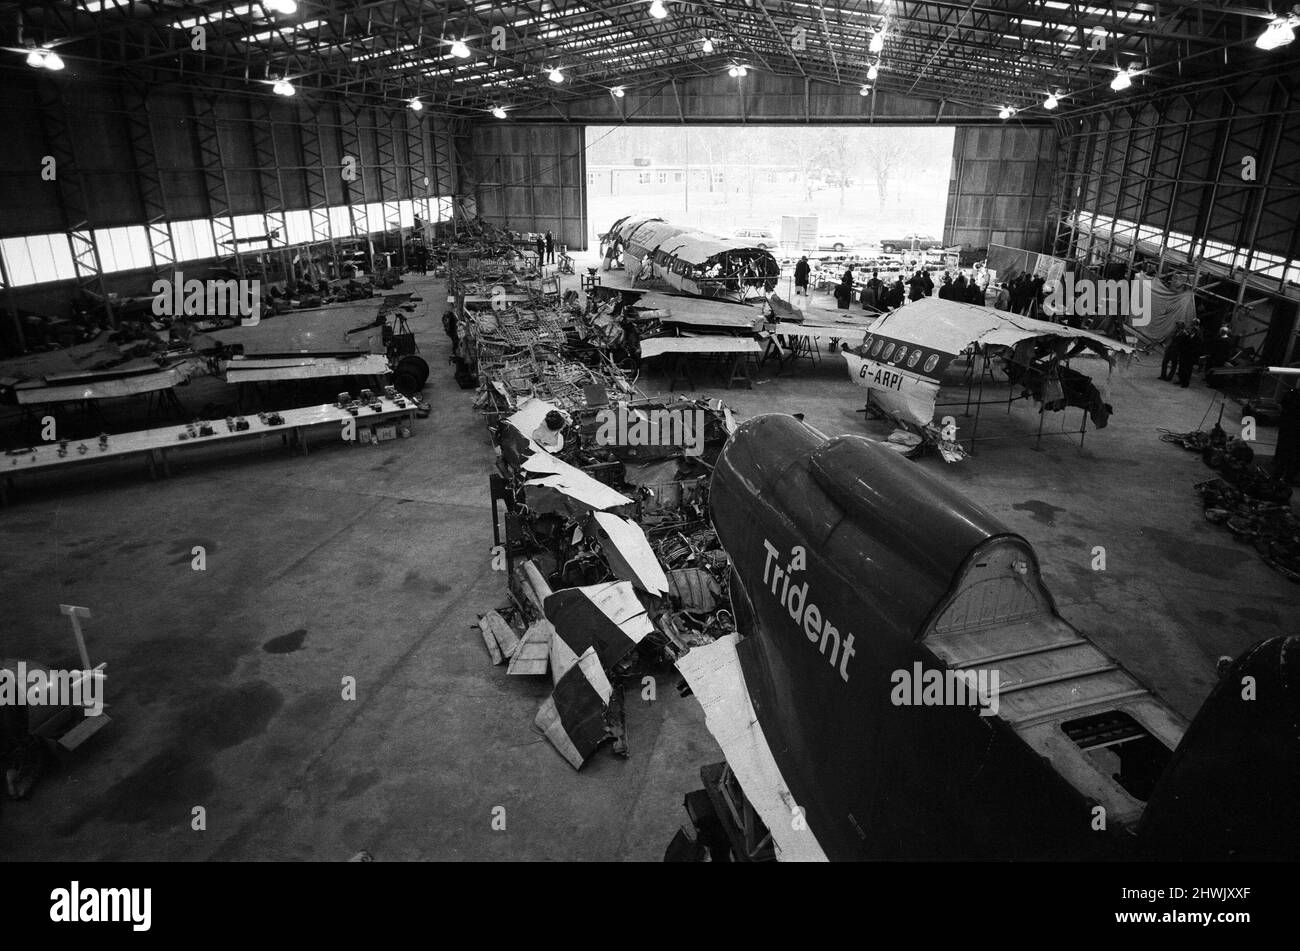 Inquiry into the Staines Air Disaster. The wreck of British European Airways Flight 548 which crashed near Staines, killing 118 people, has been reassembled in a hangar at RAE Farnborough, Hants. The Accident Investigation Branch of the Dept. of Trade and Industry conducted tests on the wreck, to assist the Court of Inquiry. 17th November 1972. Stock Photo